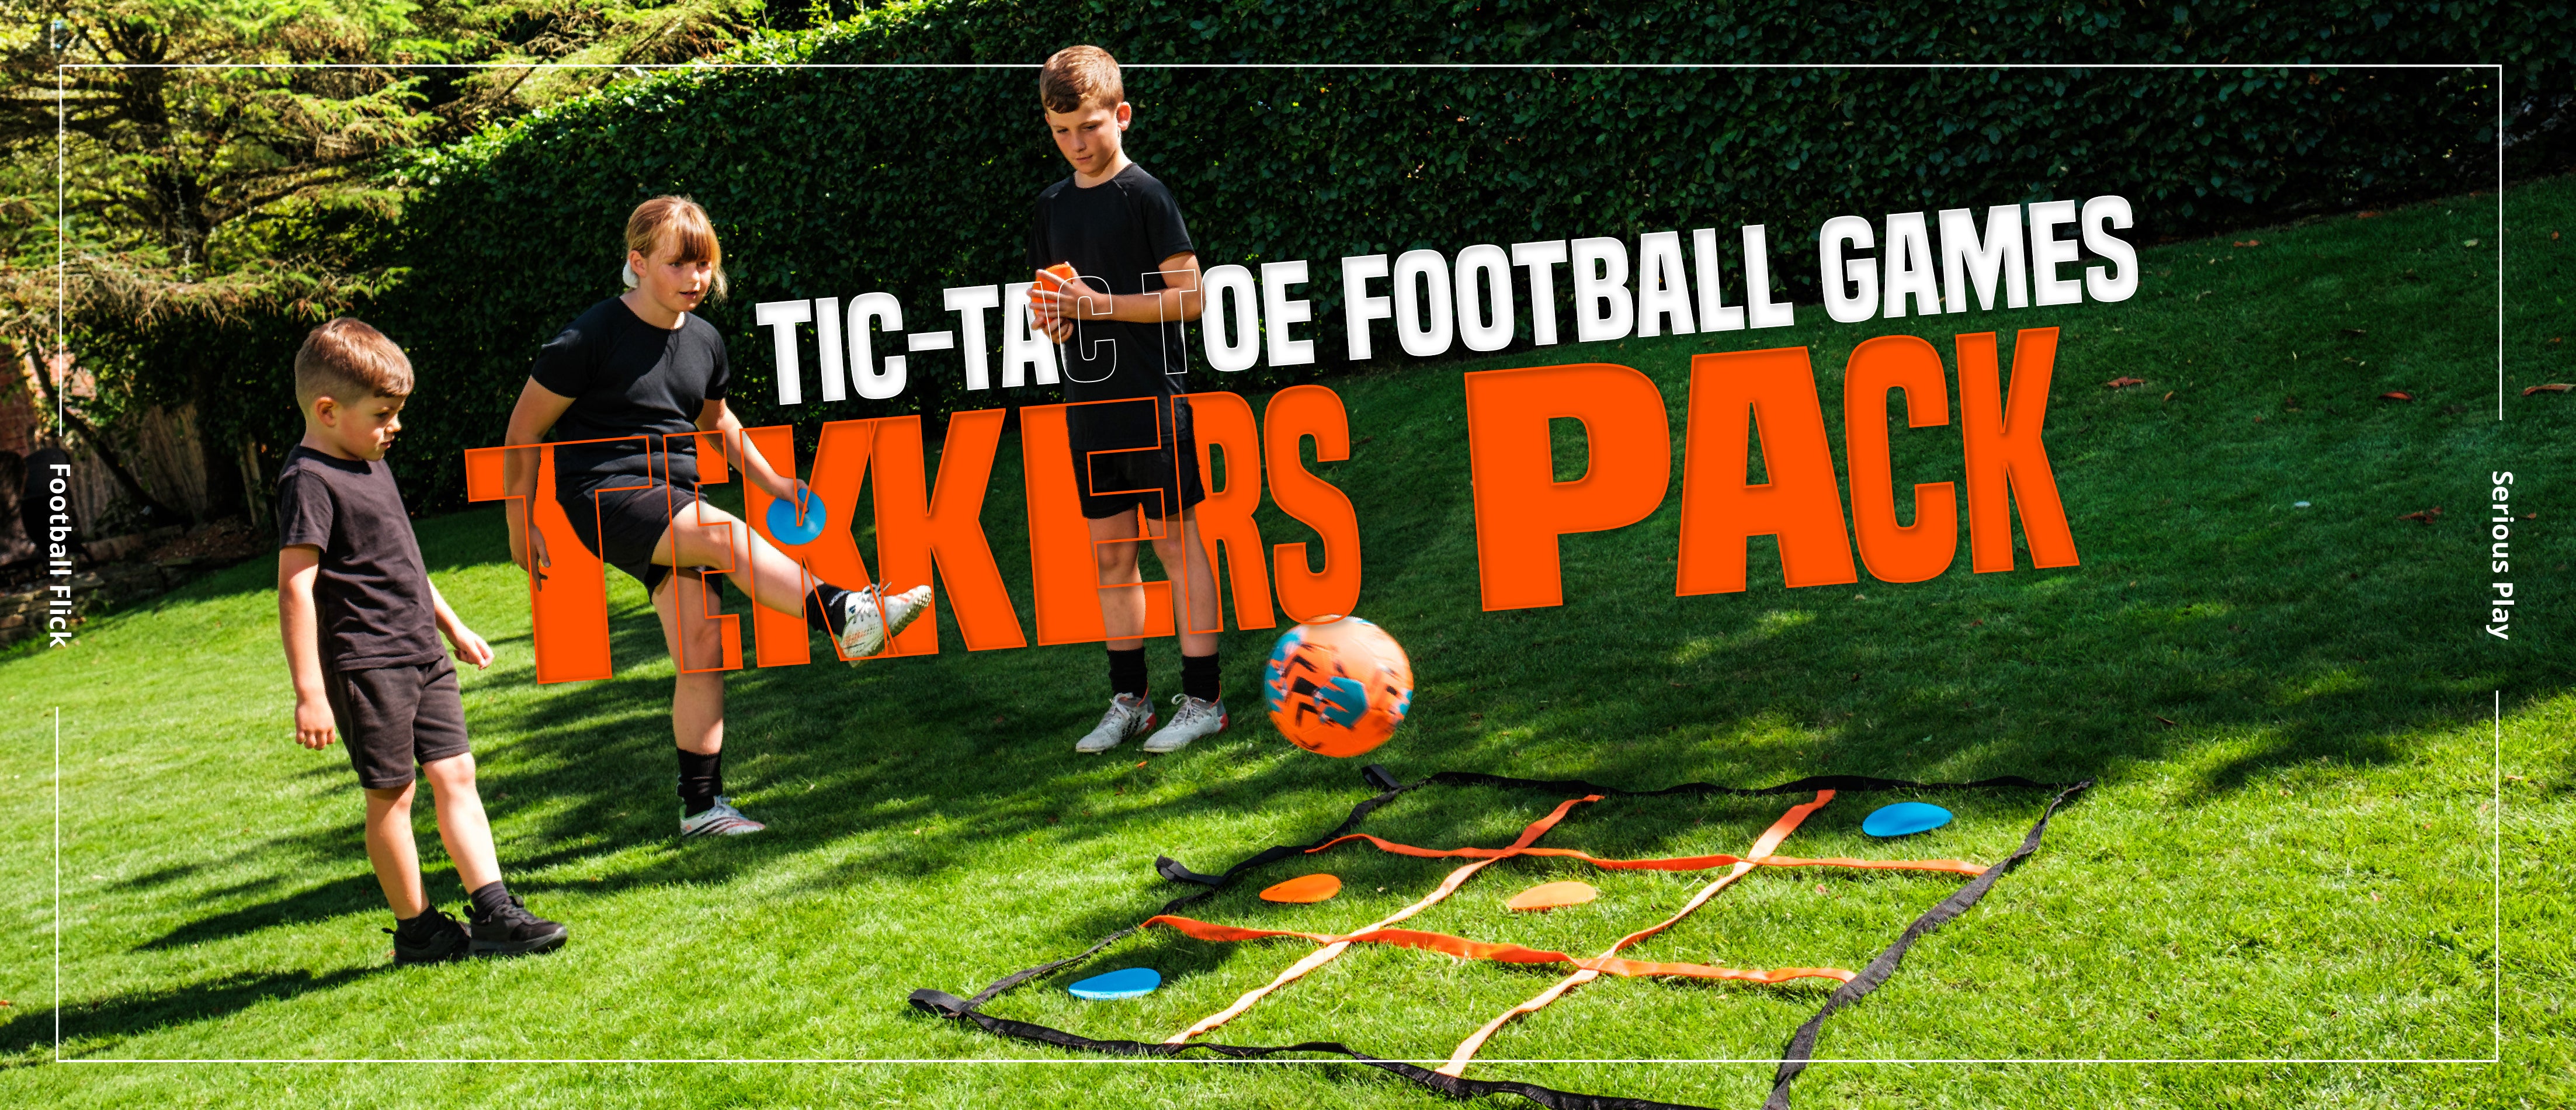 Tic-Tac-Toe Football and Other Games to Play With the Tekkers Pack!